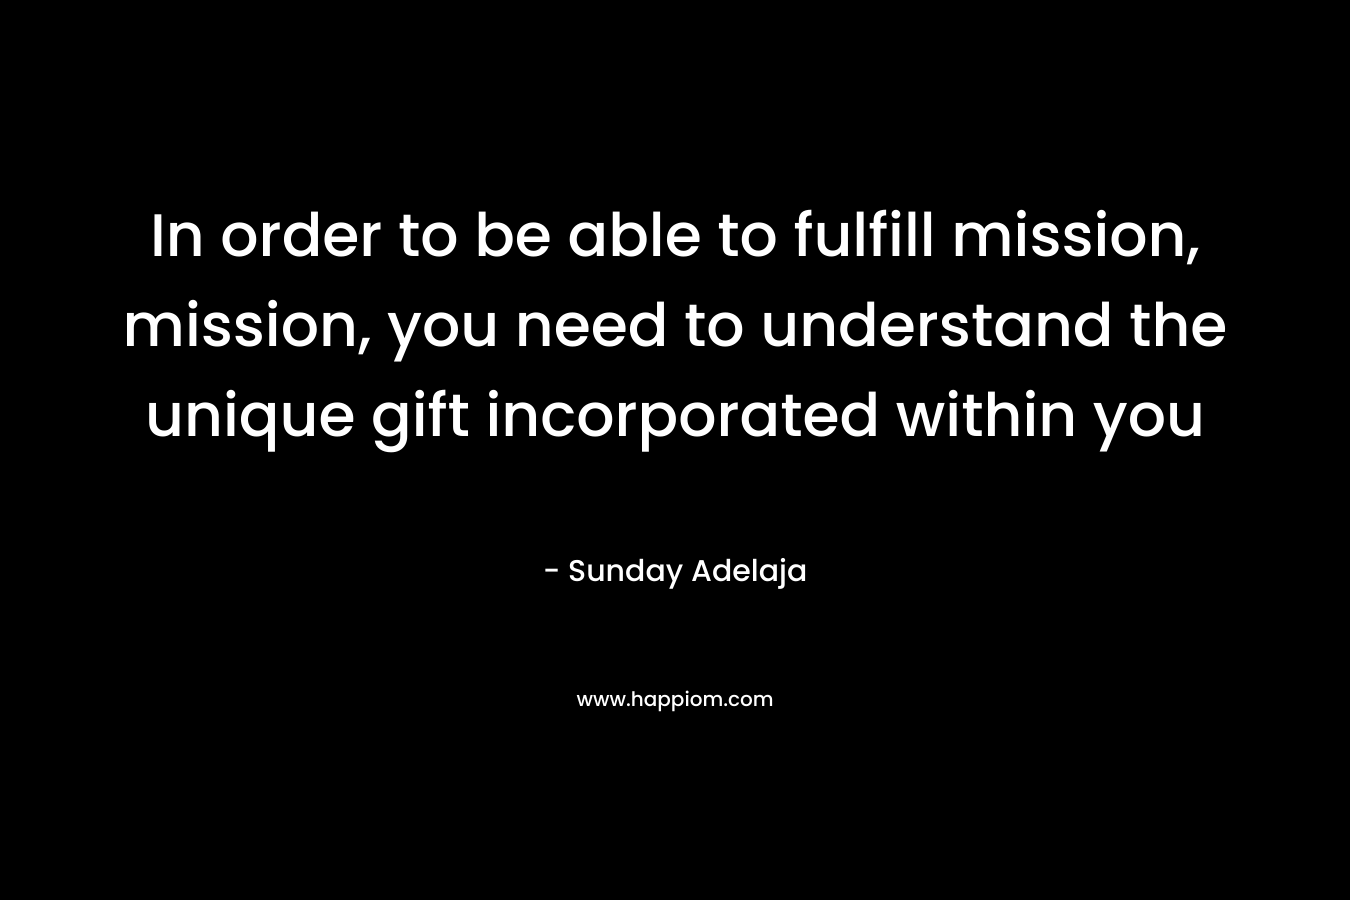 In order to be able to fulfill mission, mission, you need to understand the unique gift incorporated within you